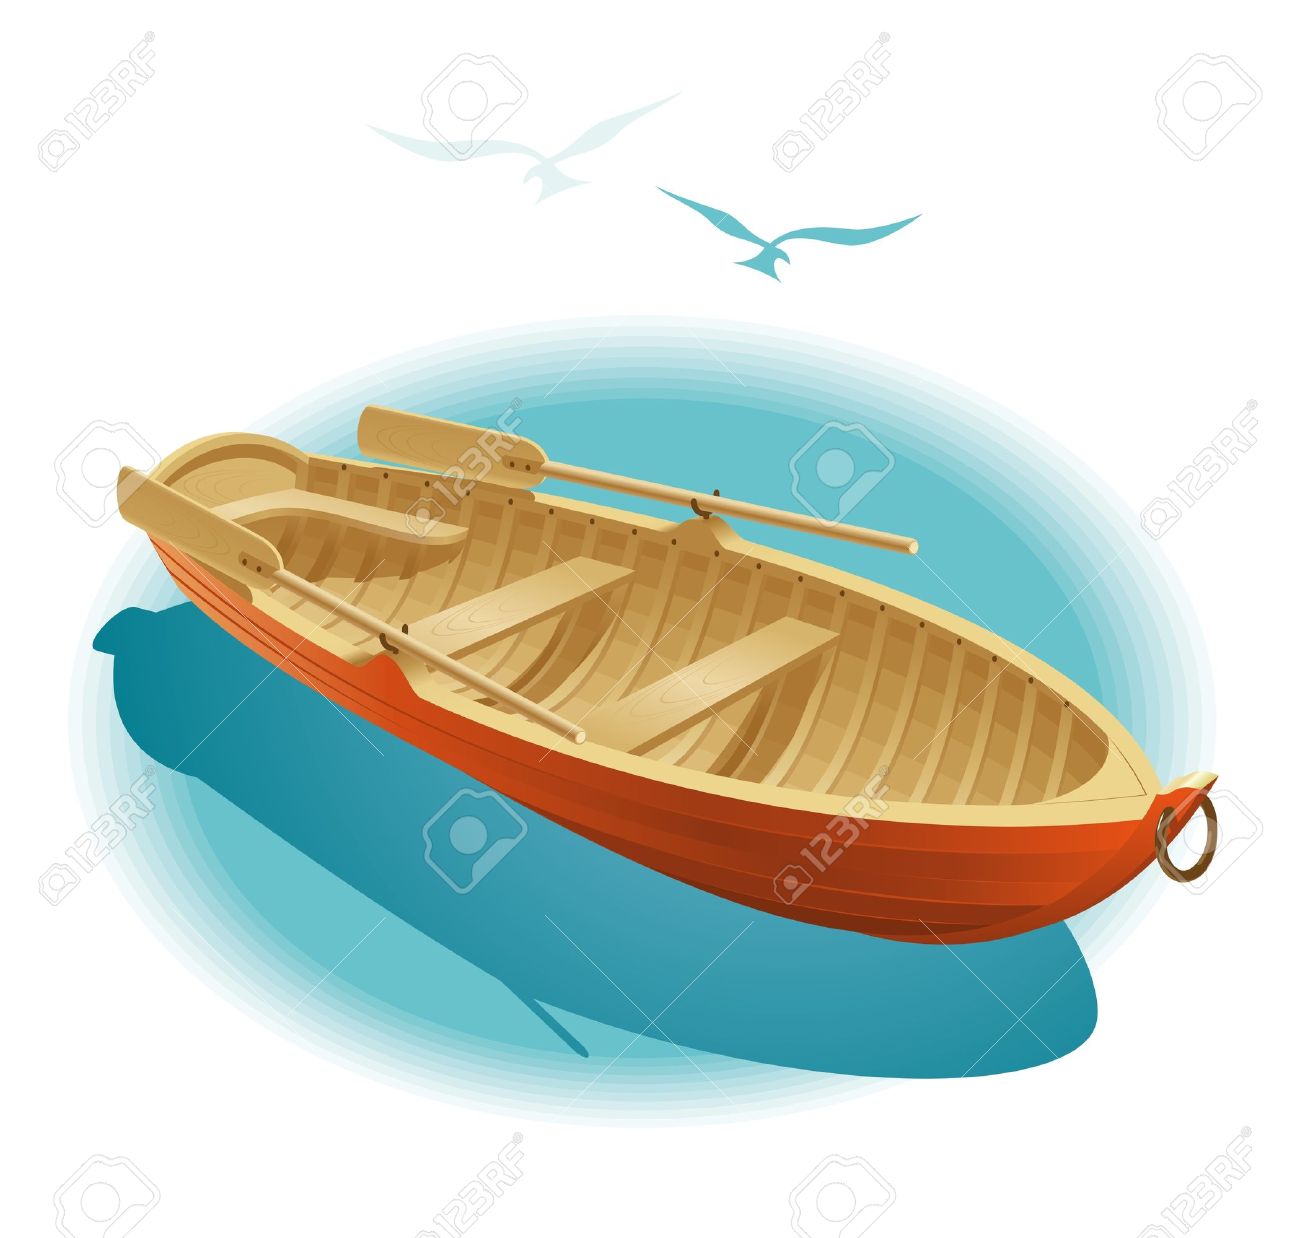 Small wooden boat on the water clipart.